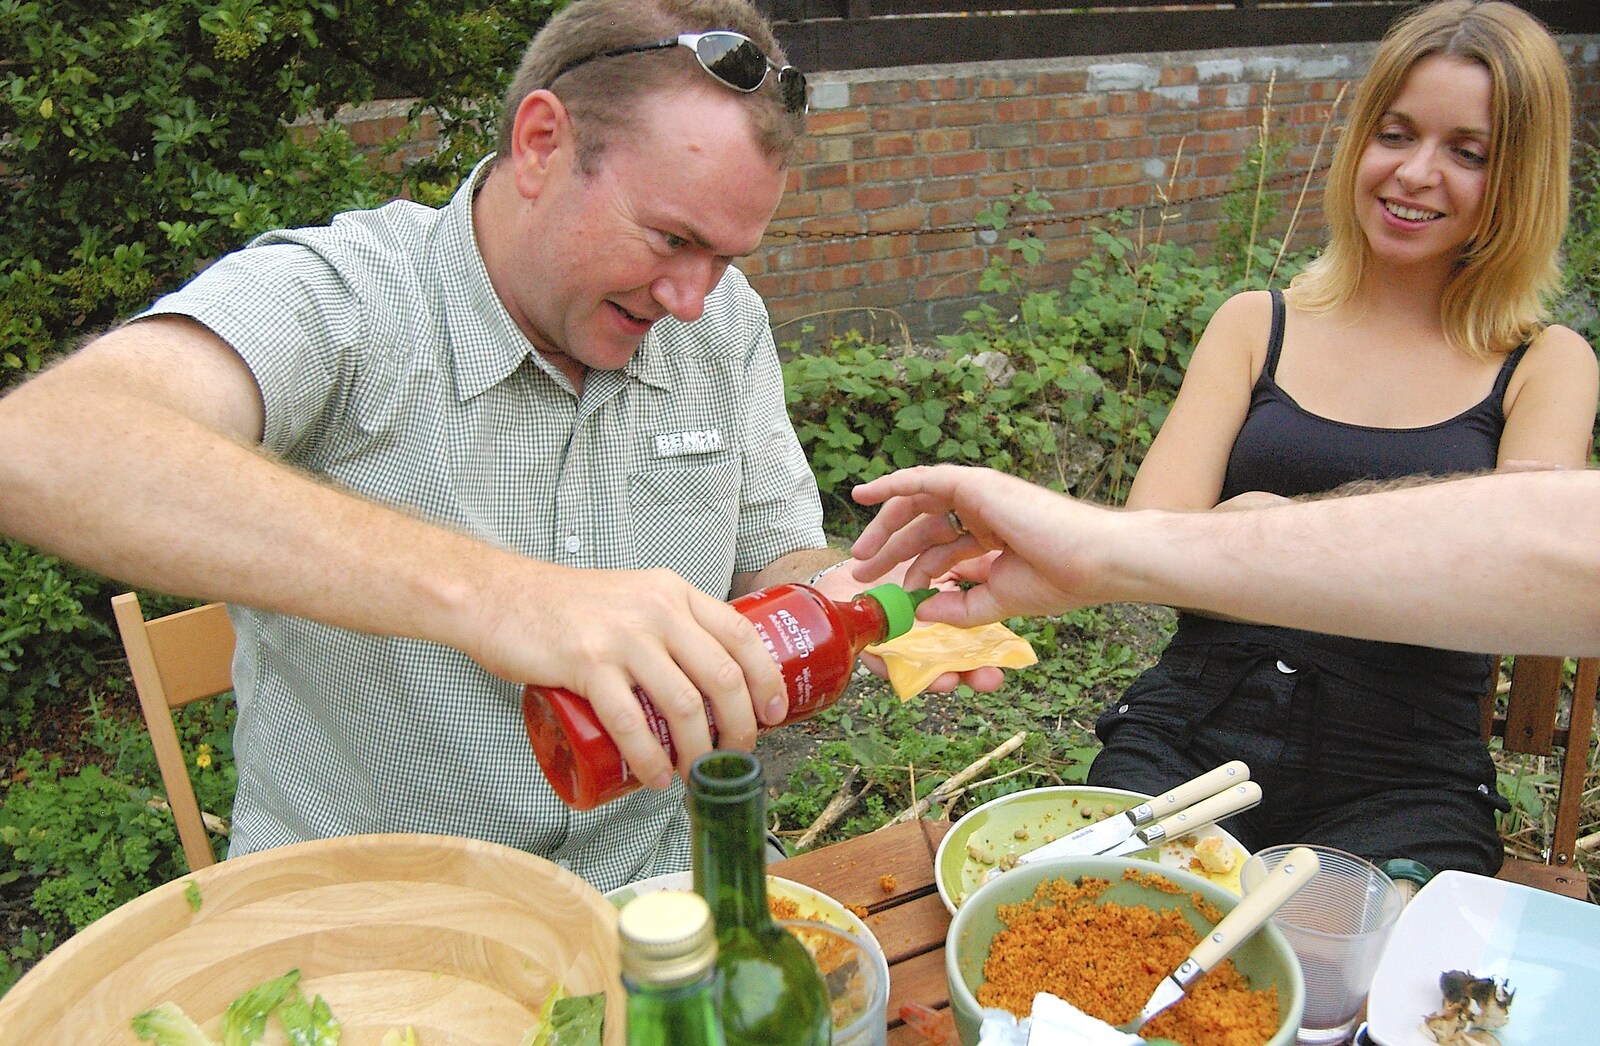 Hot Sriracha from Cho Mee is applied from A Kingston Street Barbeque with Rachel and Sam, North Romsey, Cambridge- 2nd August 2006